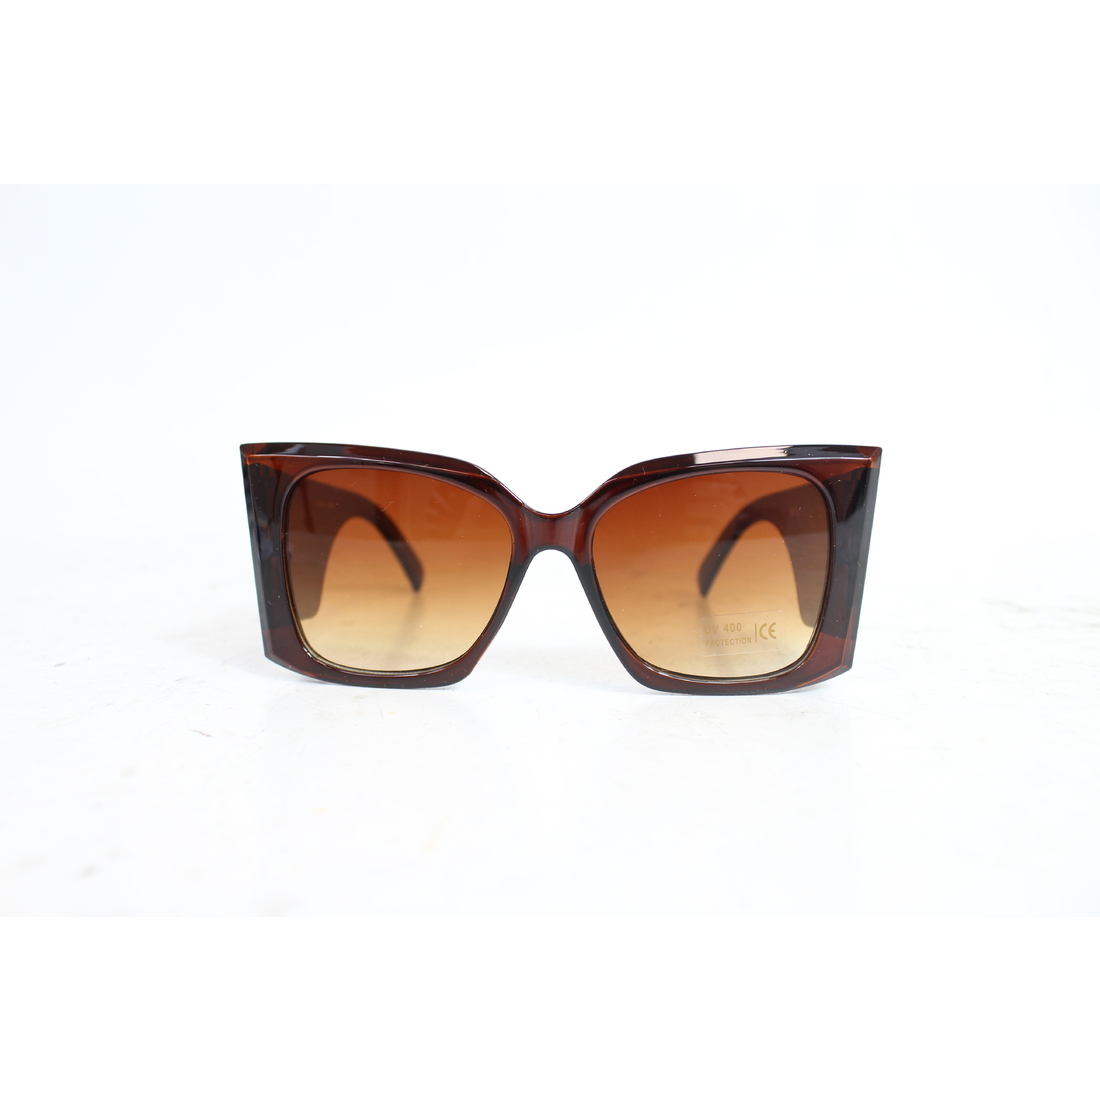 Wide cat eye with plain frame